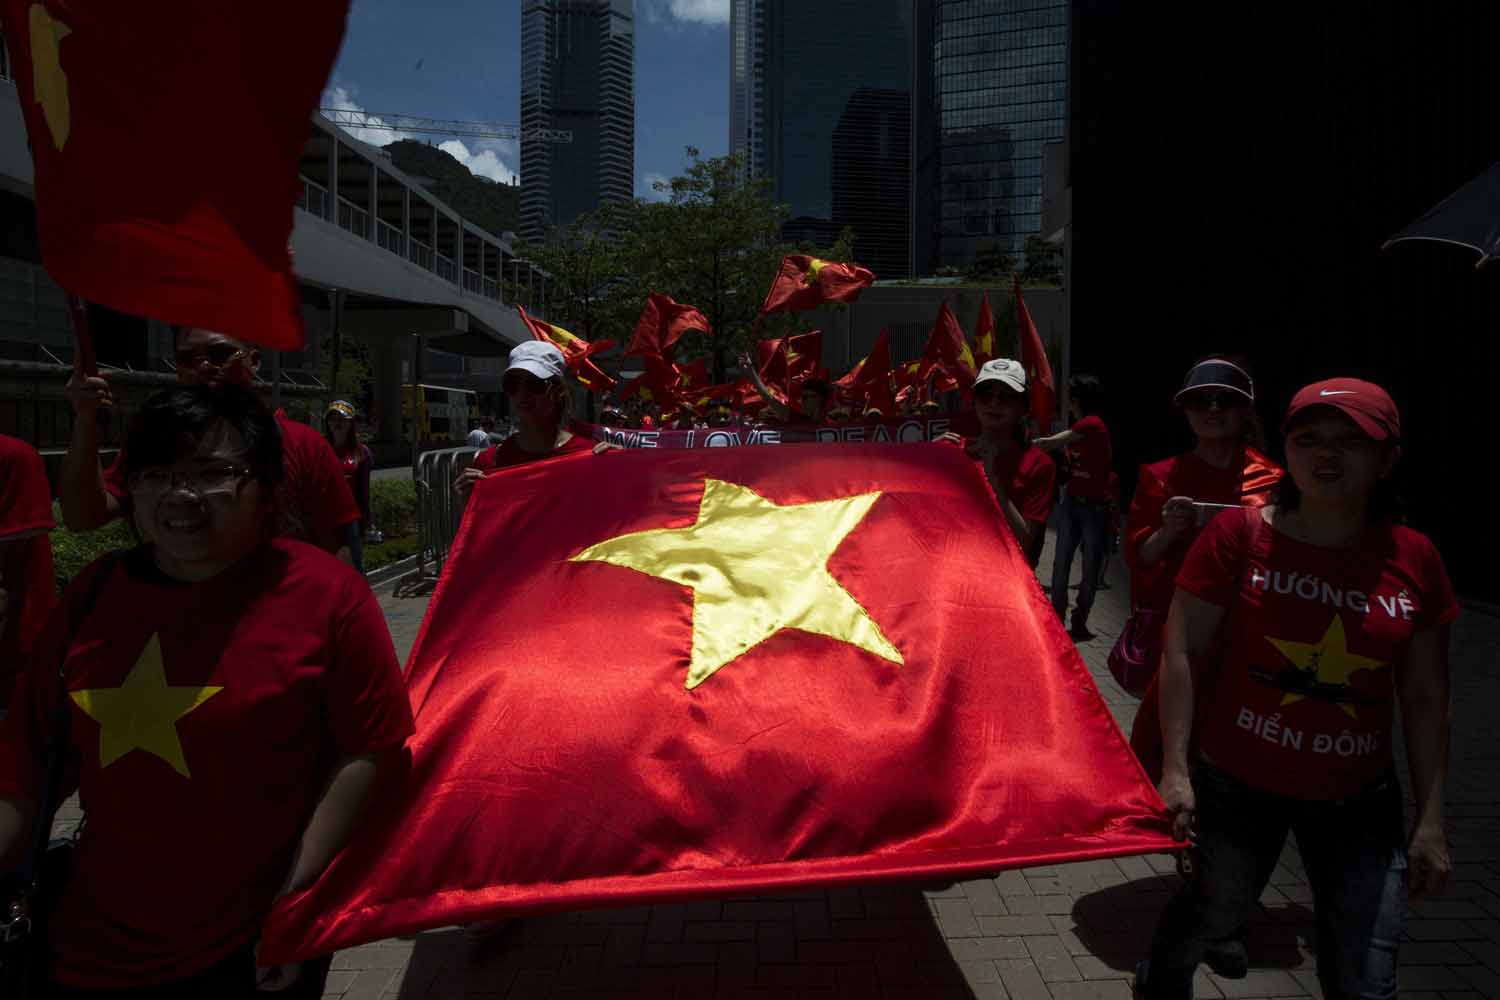 Hong Kong based Vietnamese demonstrators carry Vietnam's flag during a protest against China's territory claim in Hong Kong May 25, 2014. Around 200 people marched on Sunday to declare Paracel Islands belong to Vietnam. REUTERS/Tyrone Siu (CHINA - Tags: POLITICS CIVIL UNREST TPX IMAGES OF THE DAY) (TYRONE SIU&mdash;REUTERS)